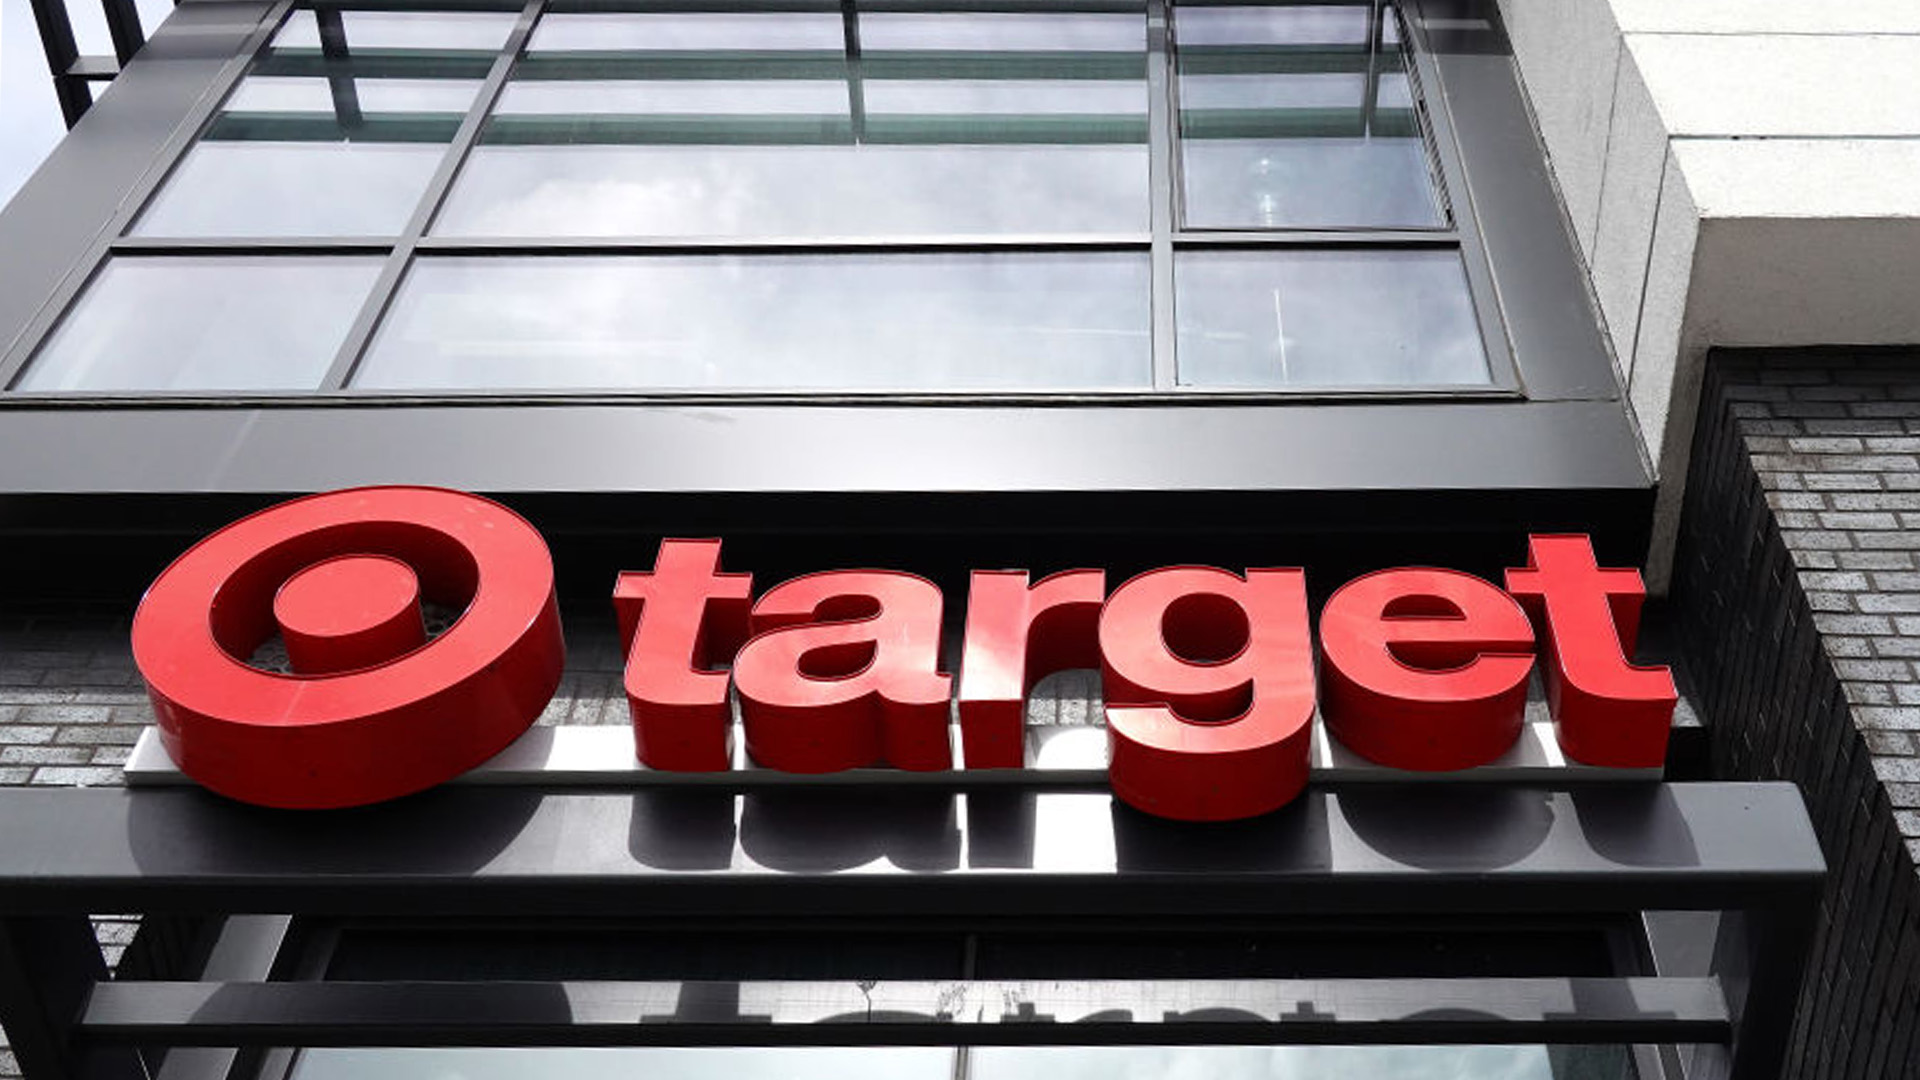 7 Diverse Brands Will Be Shelved At Target Stores Thanks To A Woman-Owned Tech Platform Prioritizing Diverse-Led Suppliers